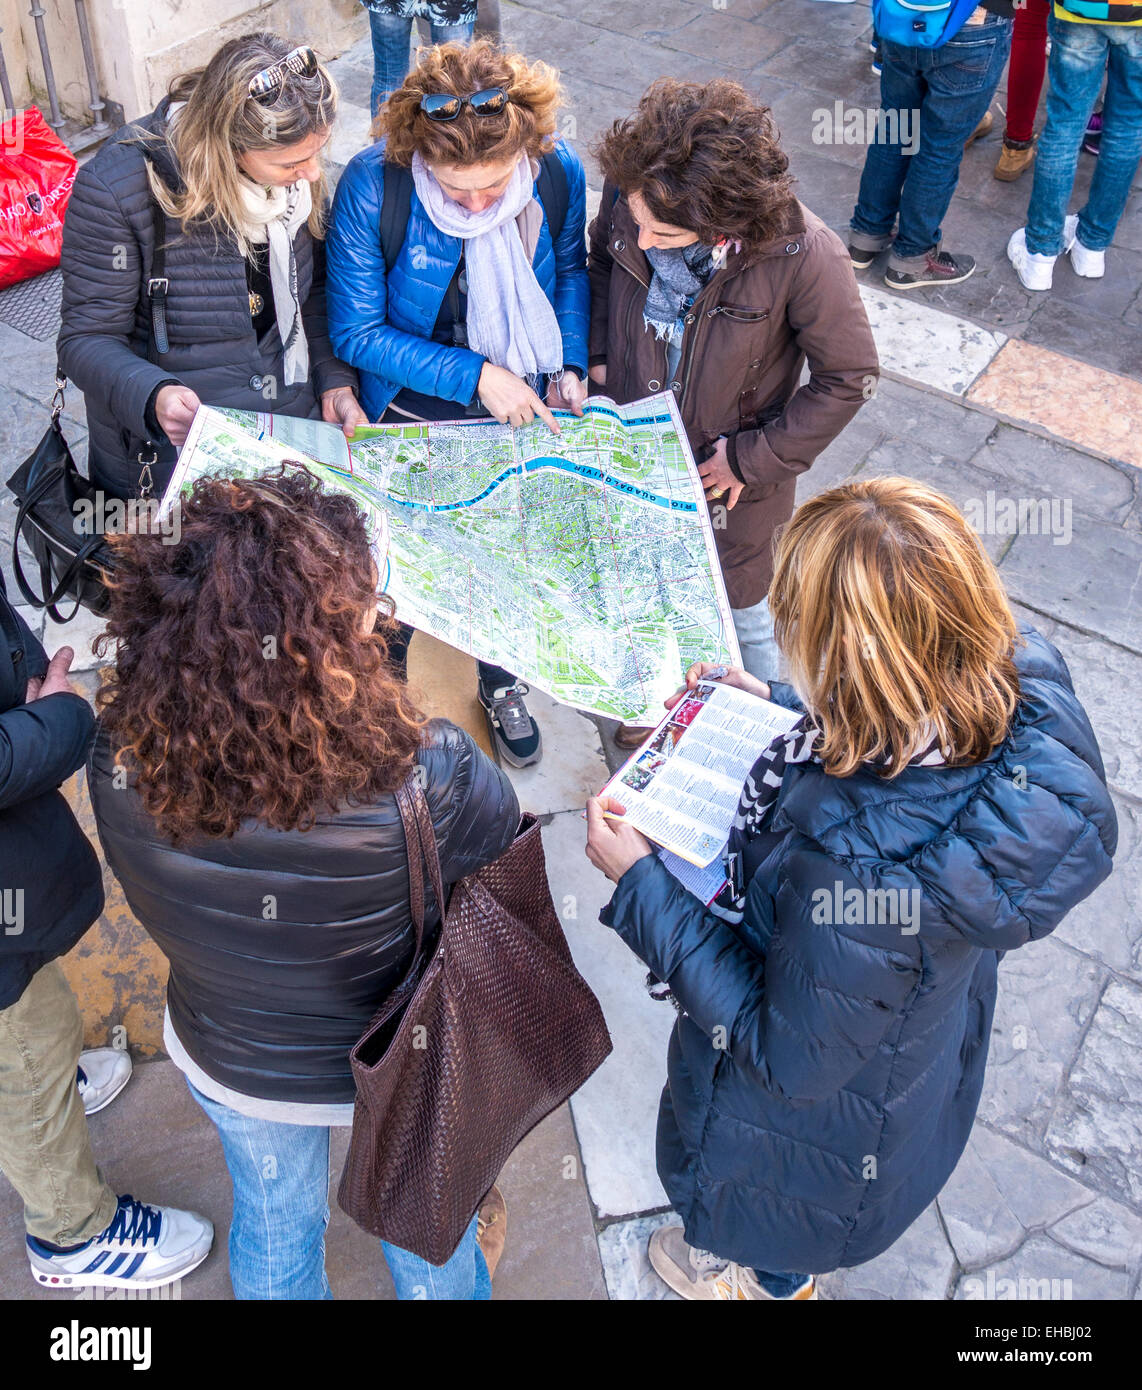 Group of five girls, young women, tourists looking at a tourist map of Seville Spain pointing and discussing directions Stock Photo